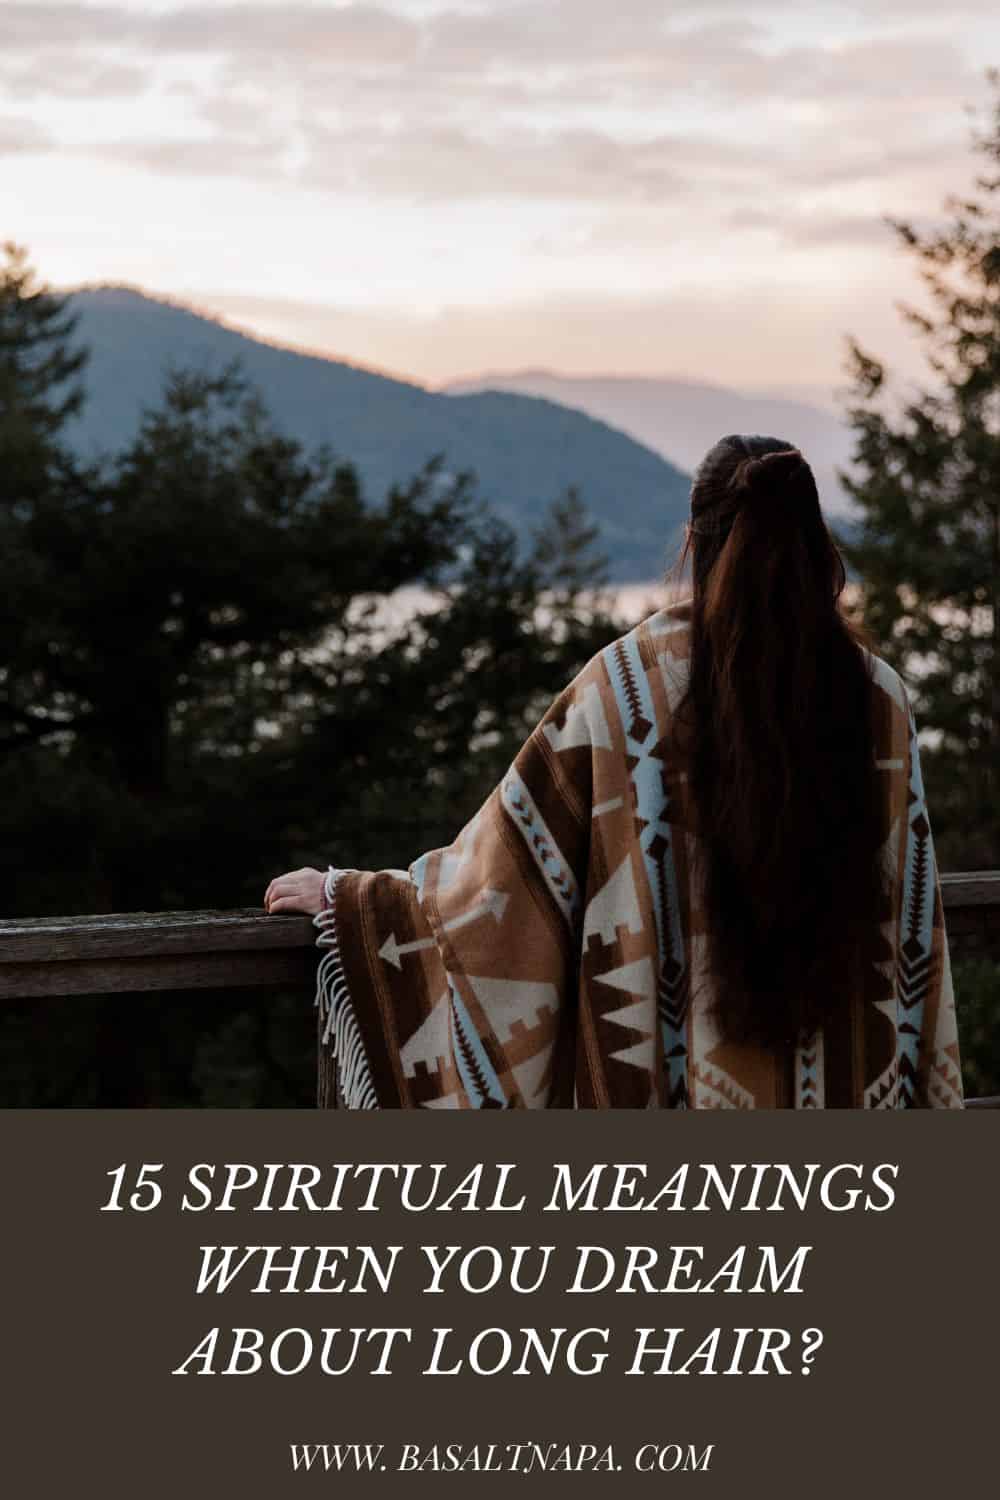 15 Spiritual Meanings When You Dream About Long Hair